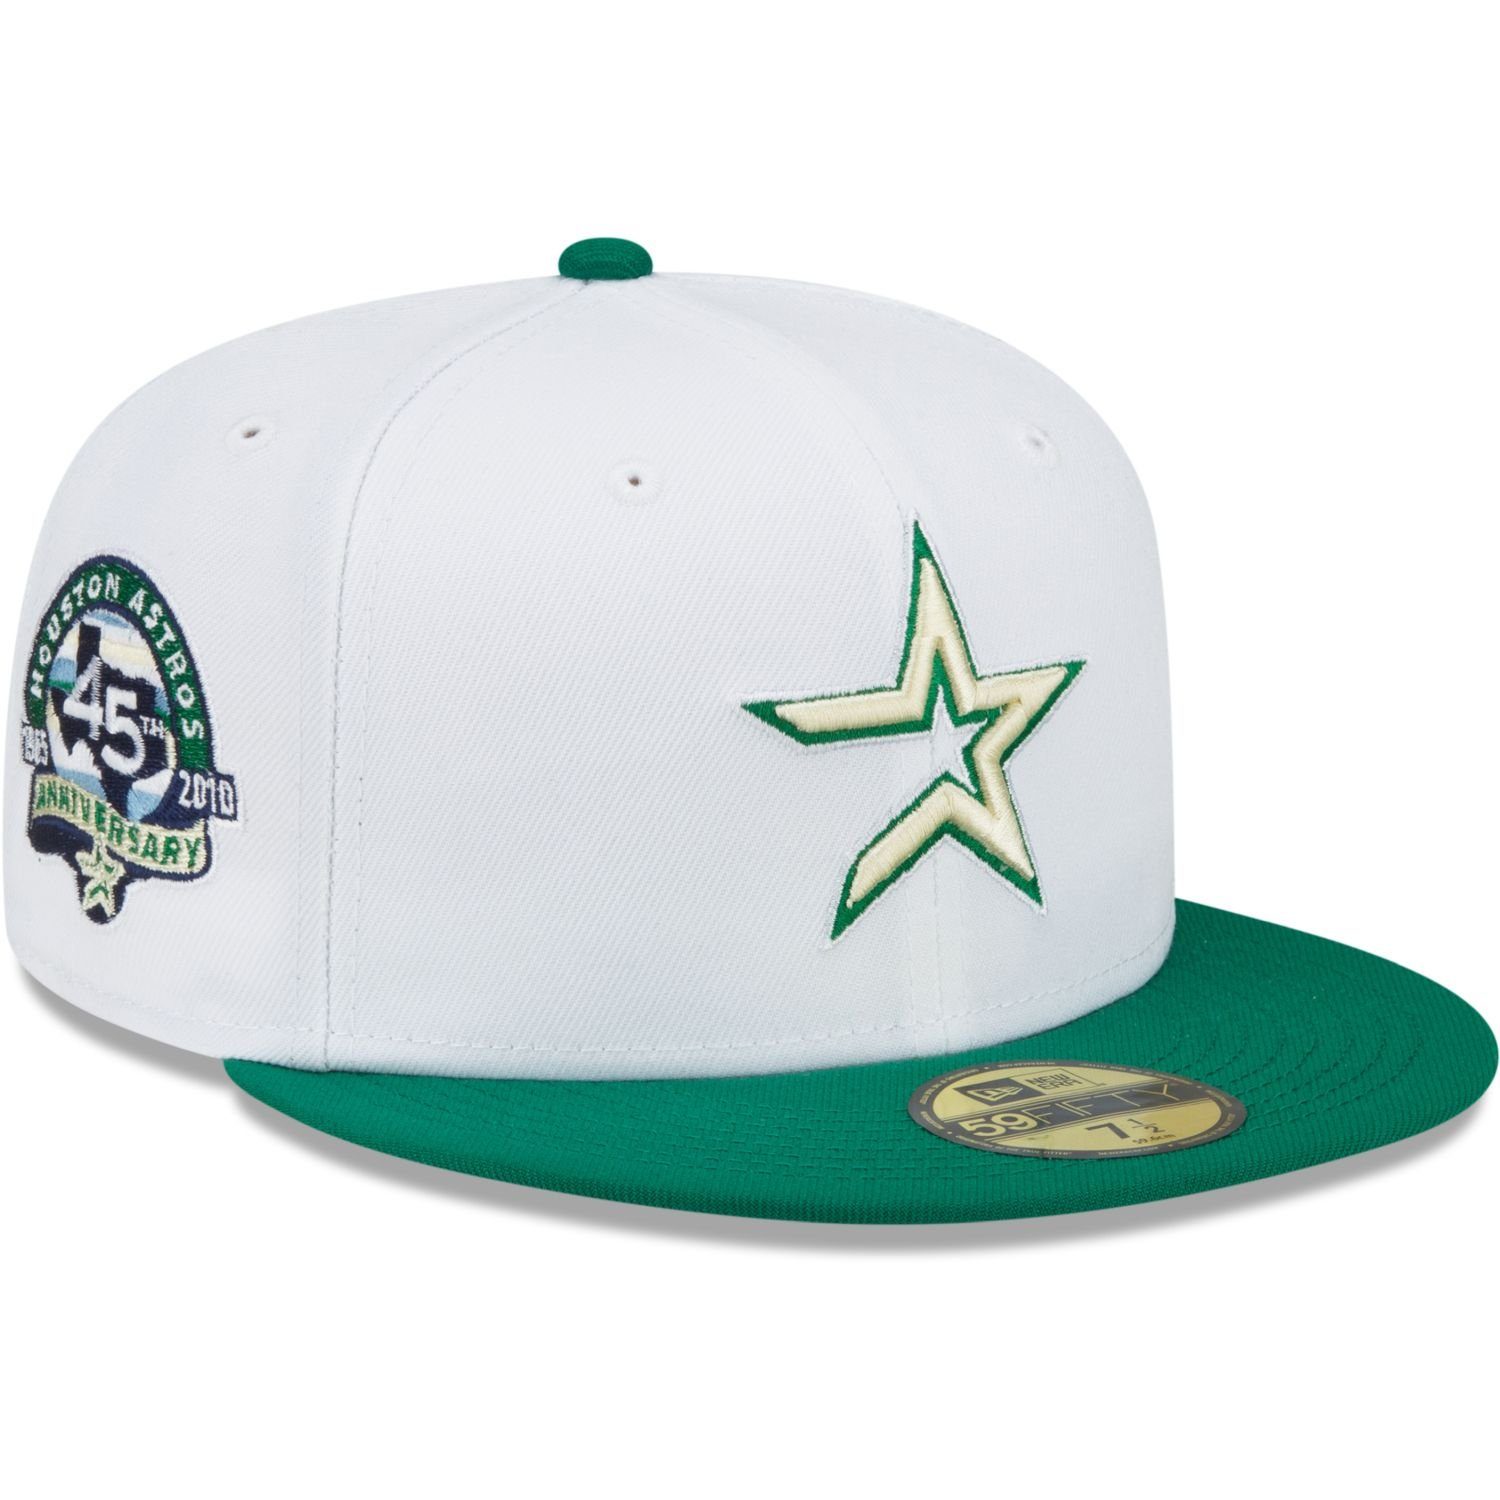 New Era Fitted Cap ANNIVERSARY Astros Houston 59Fifty